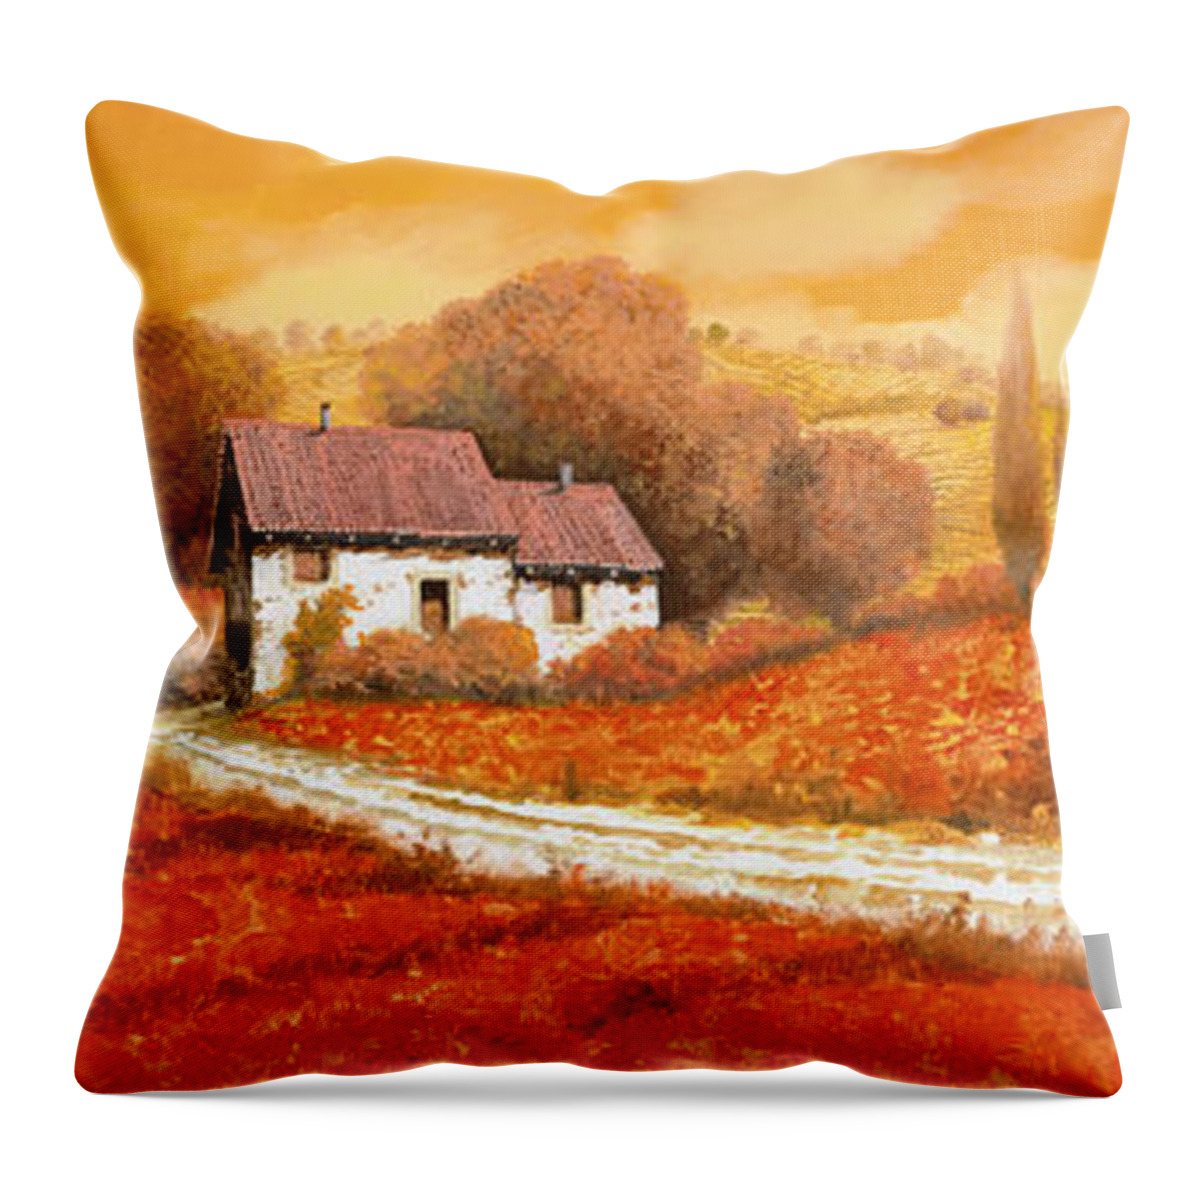 Tuscany Throw Pillow featuring the painting I papaveri rossi by Guido Borelli